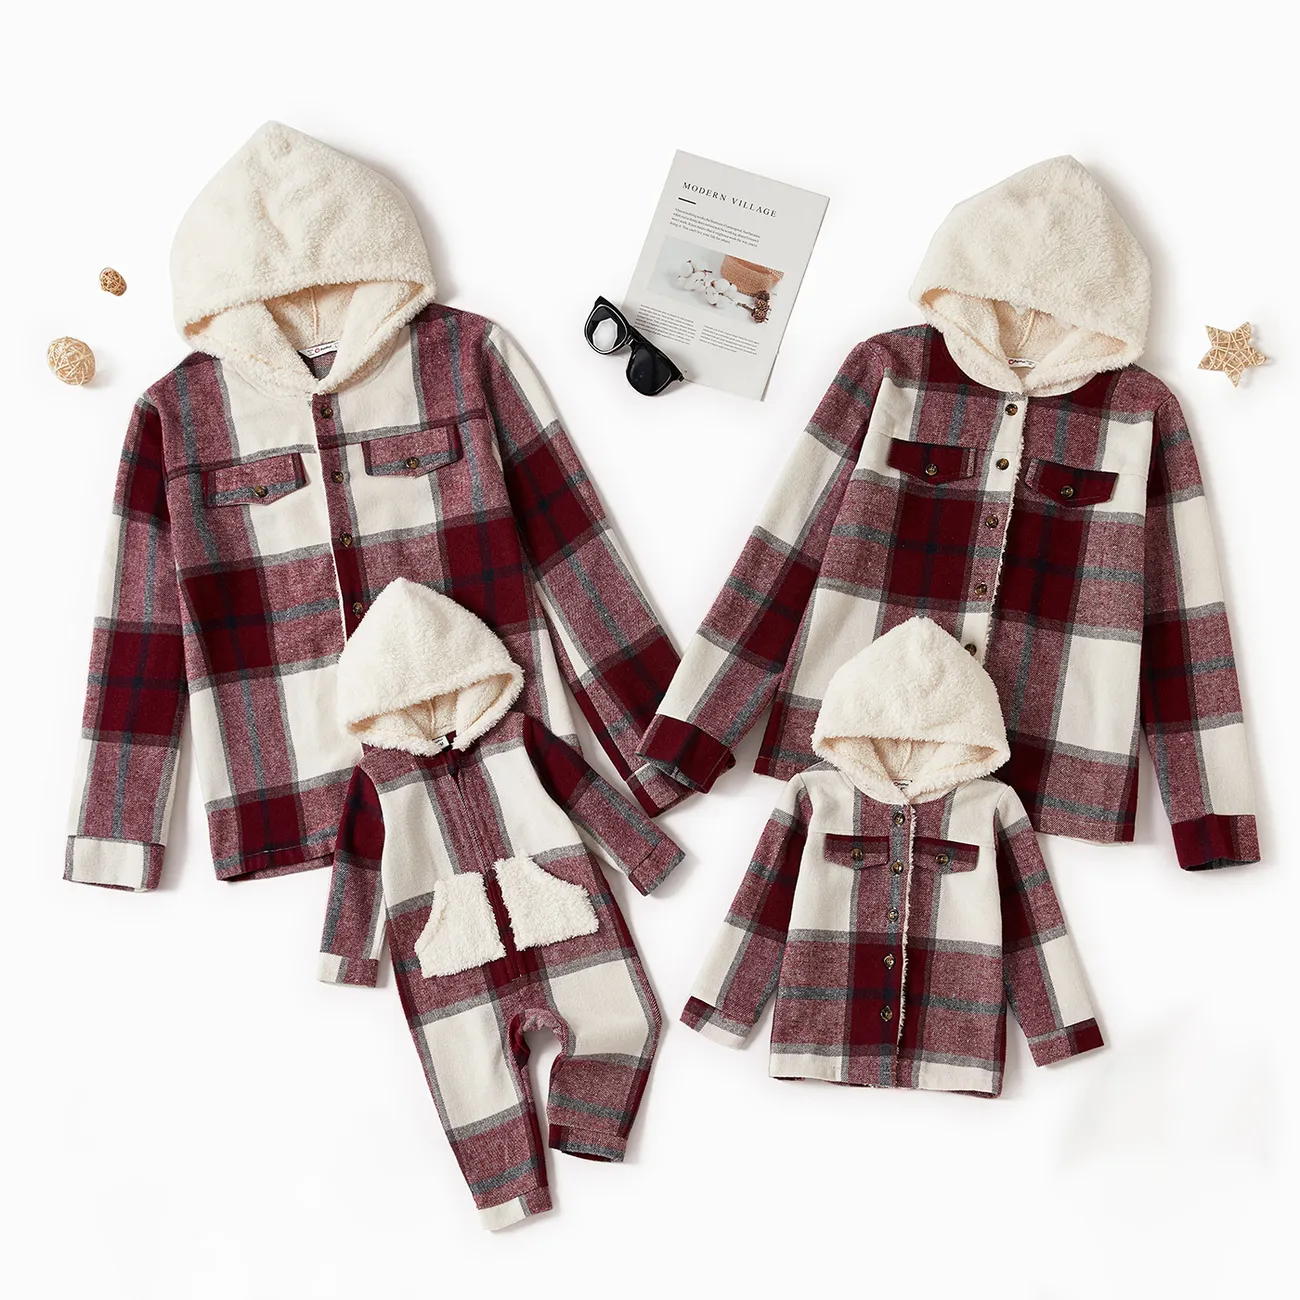 Family Matching Fleece Hooded Splicing Red Plaid Long-sleeve Outwear Tops Red/White big image 1